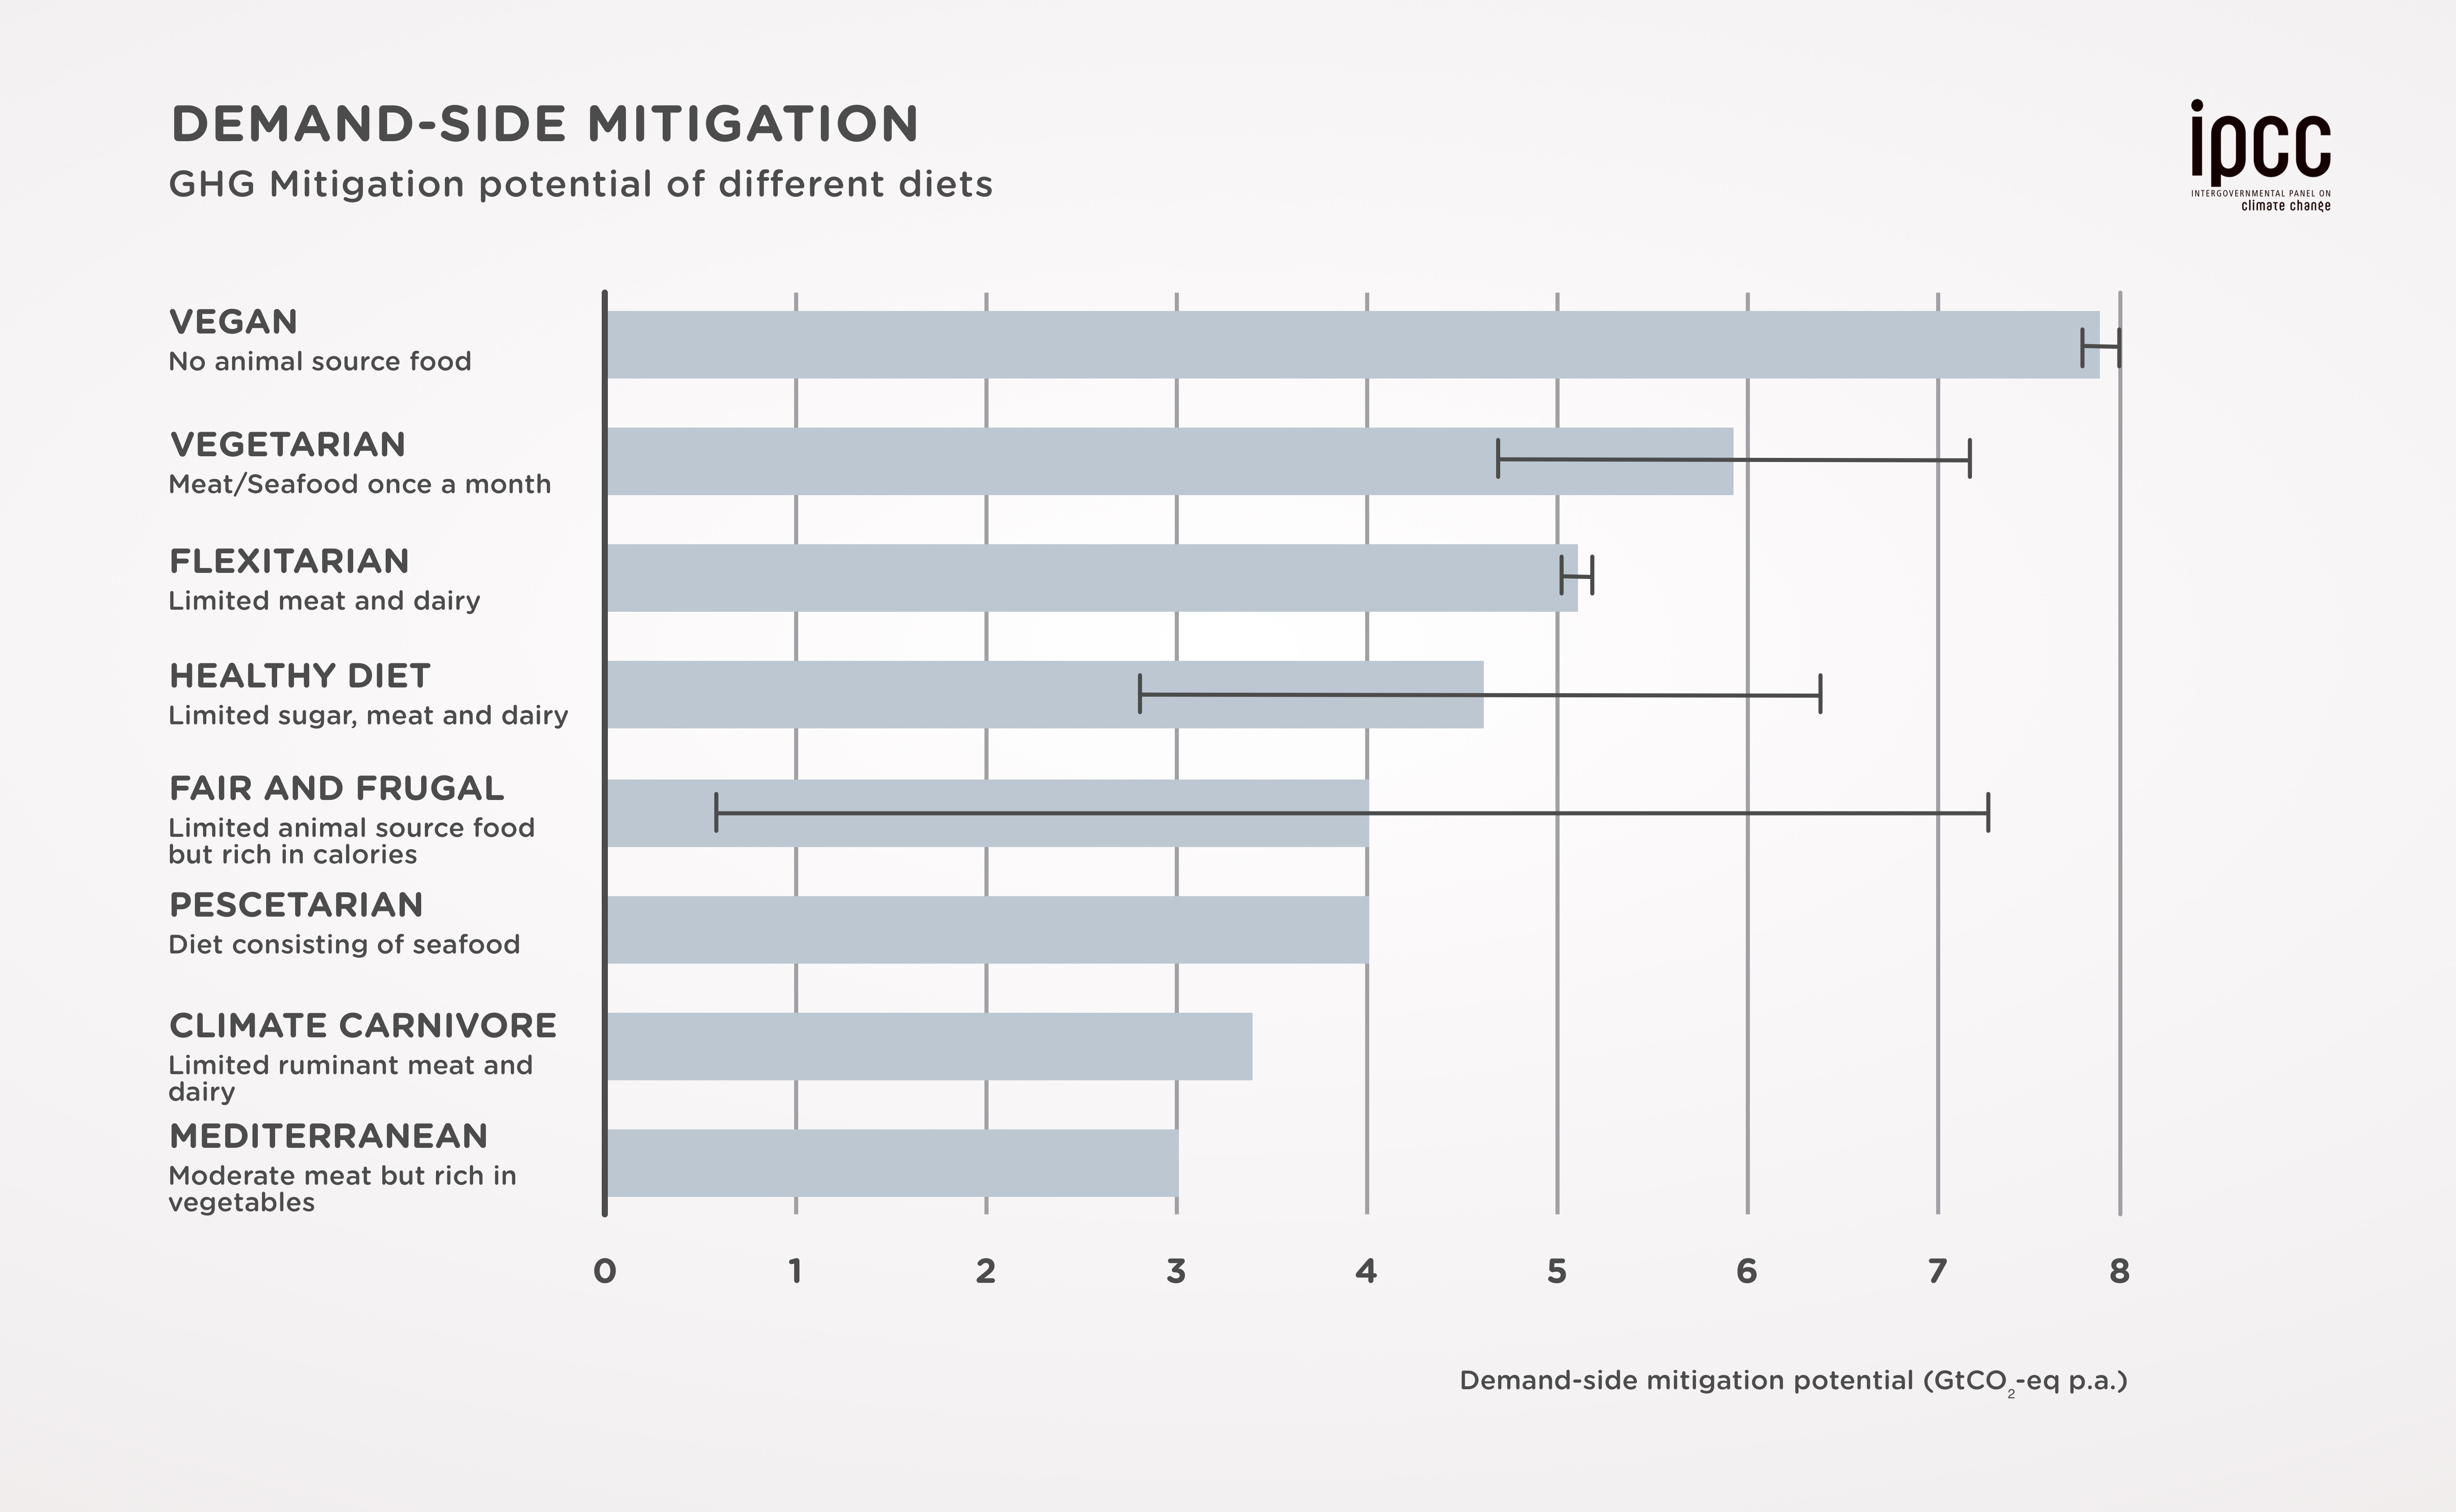 The emission mitigation potential of various diets.